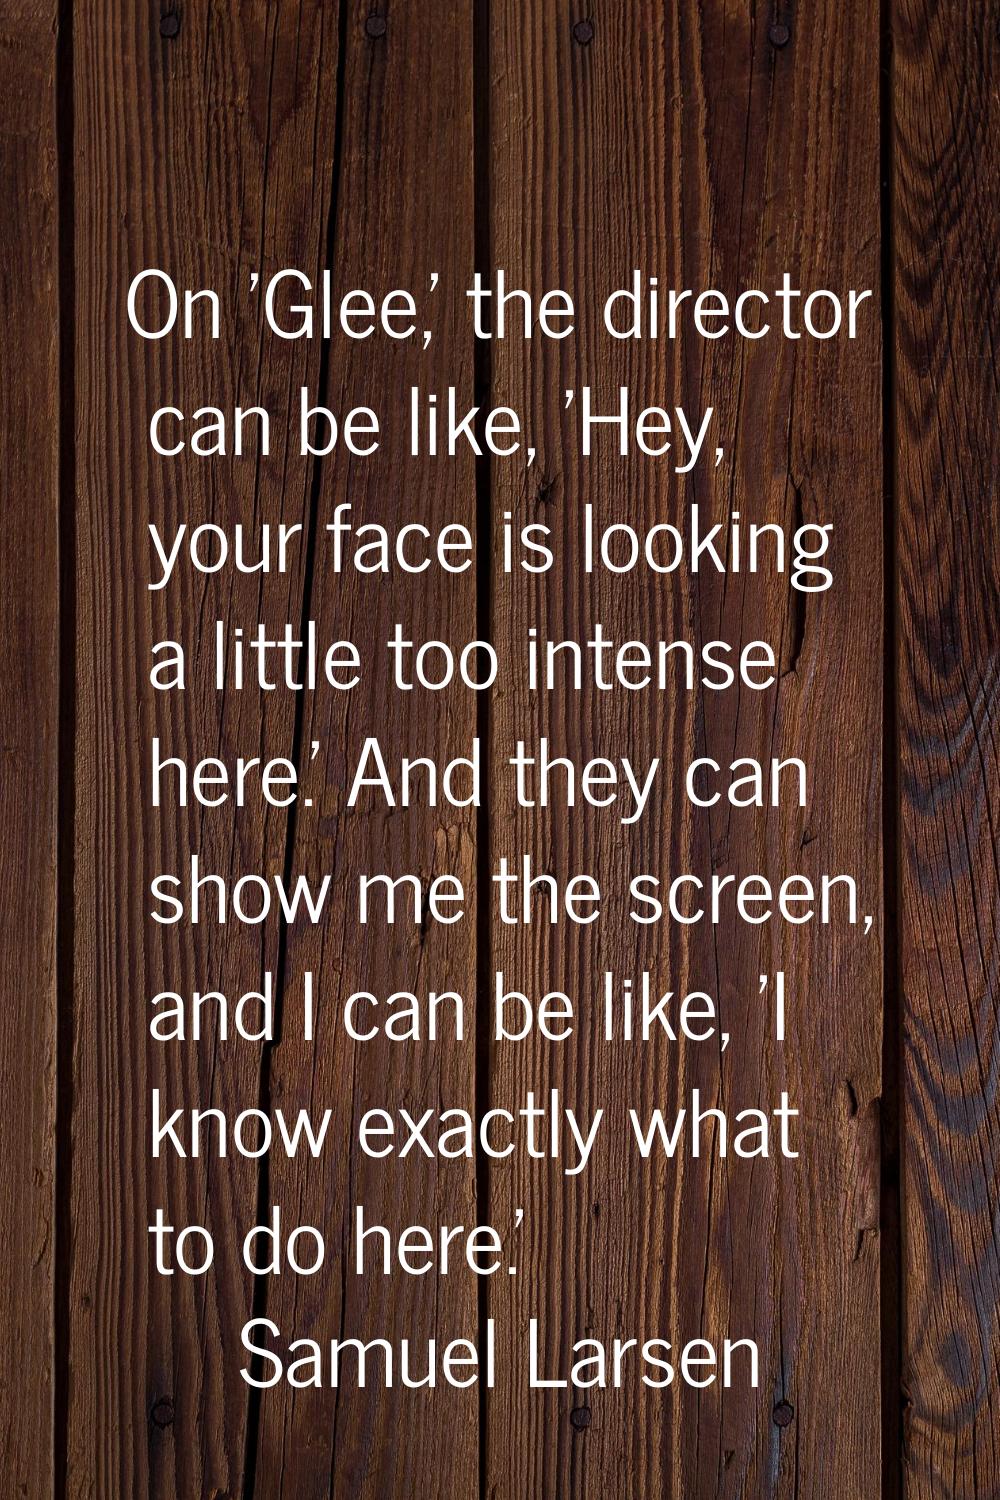 On 'Glee,' the director can be like, 'Hey, your face is looking a little too intense here.' And the